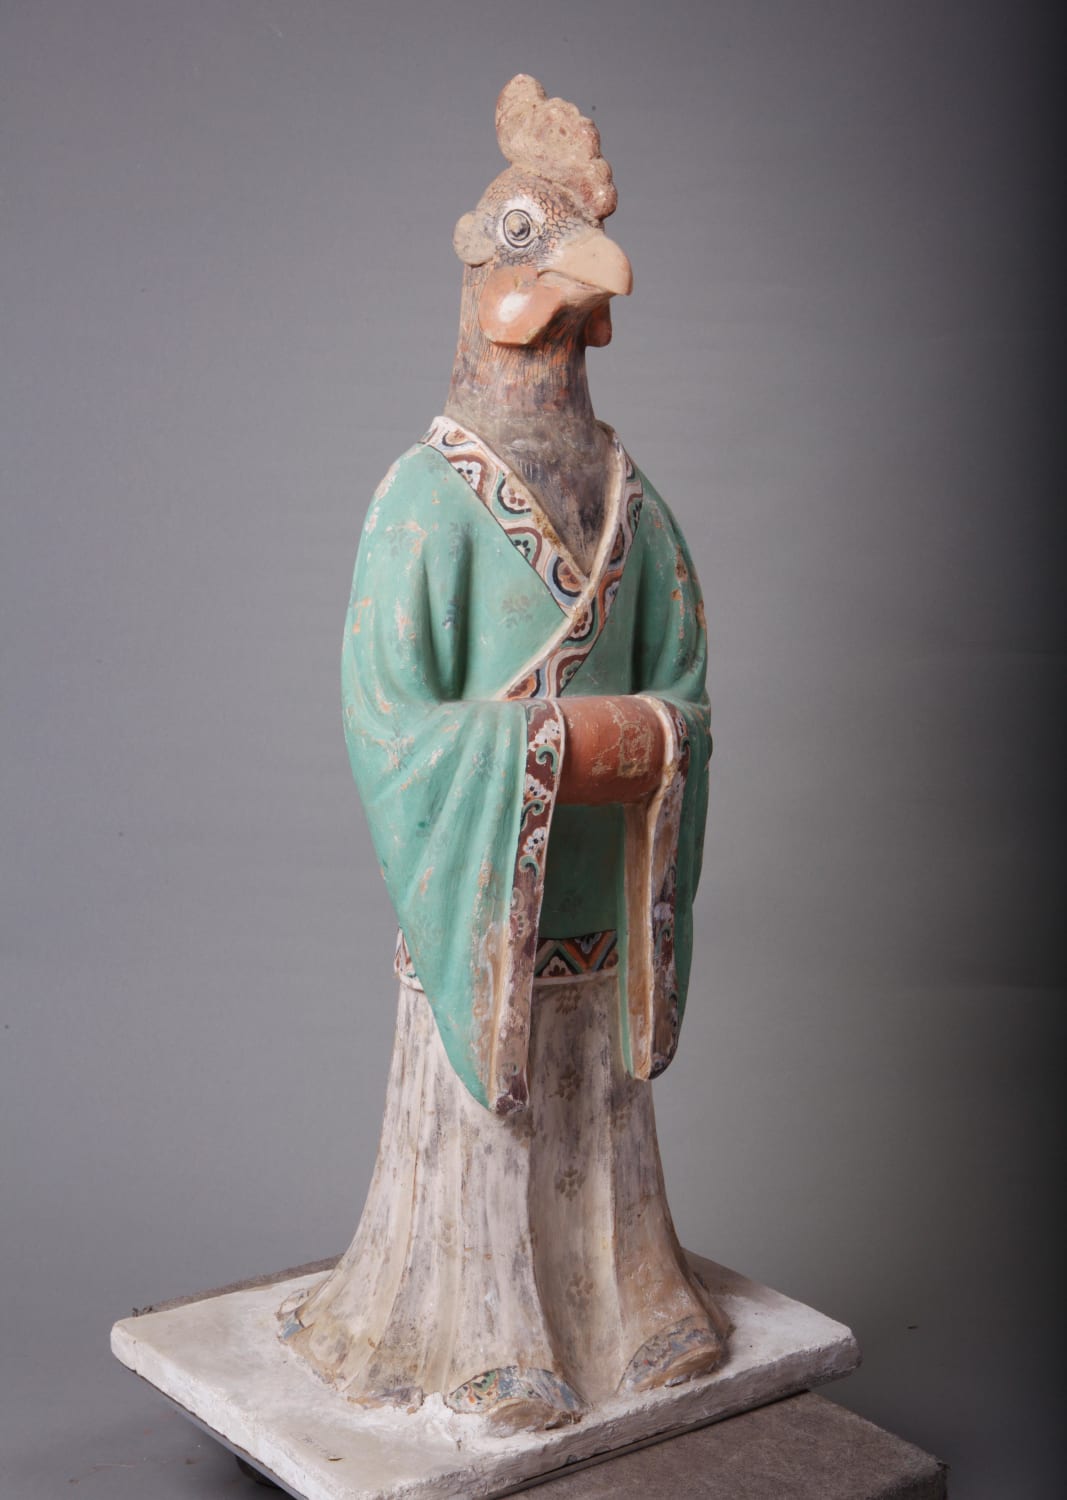 Sculpture of a chicken-headed man. China, Tang dynasty, 7th-10th century